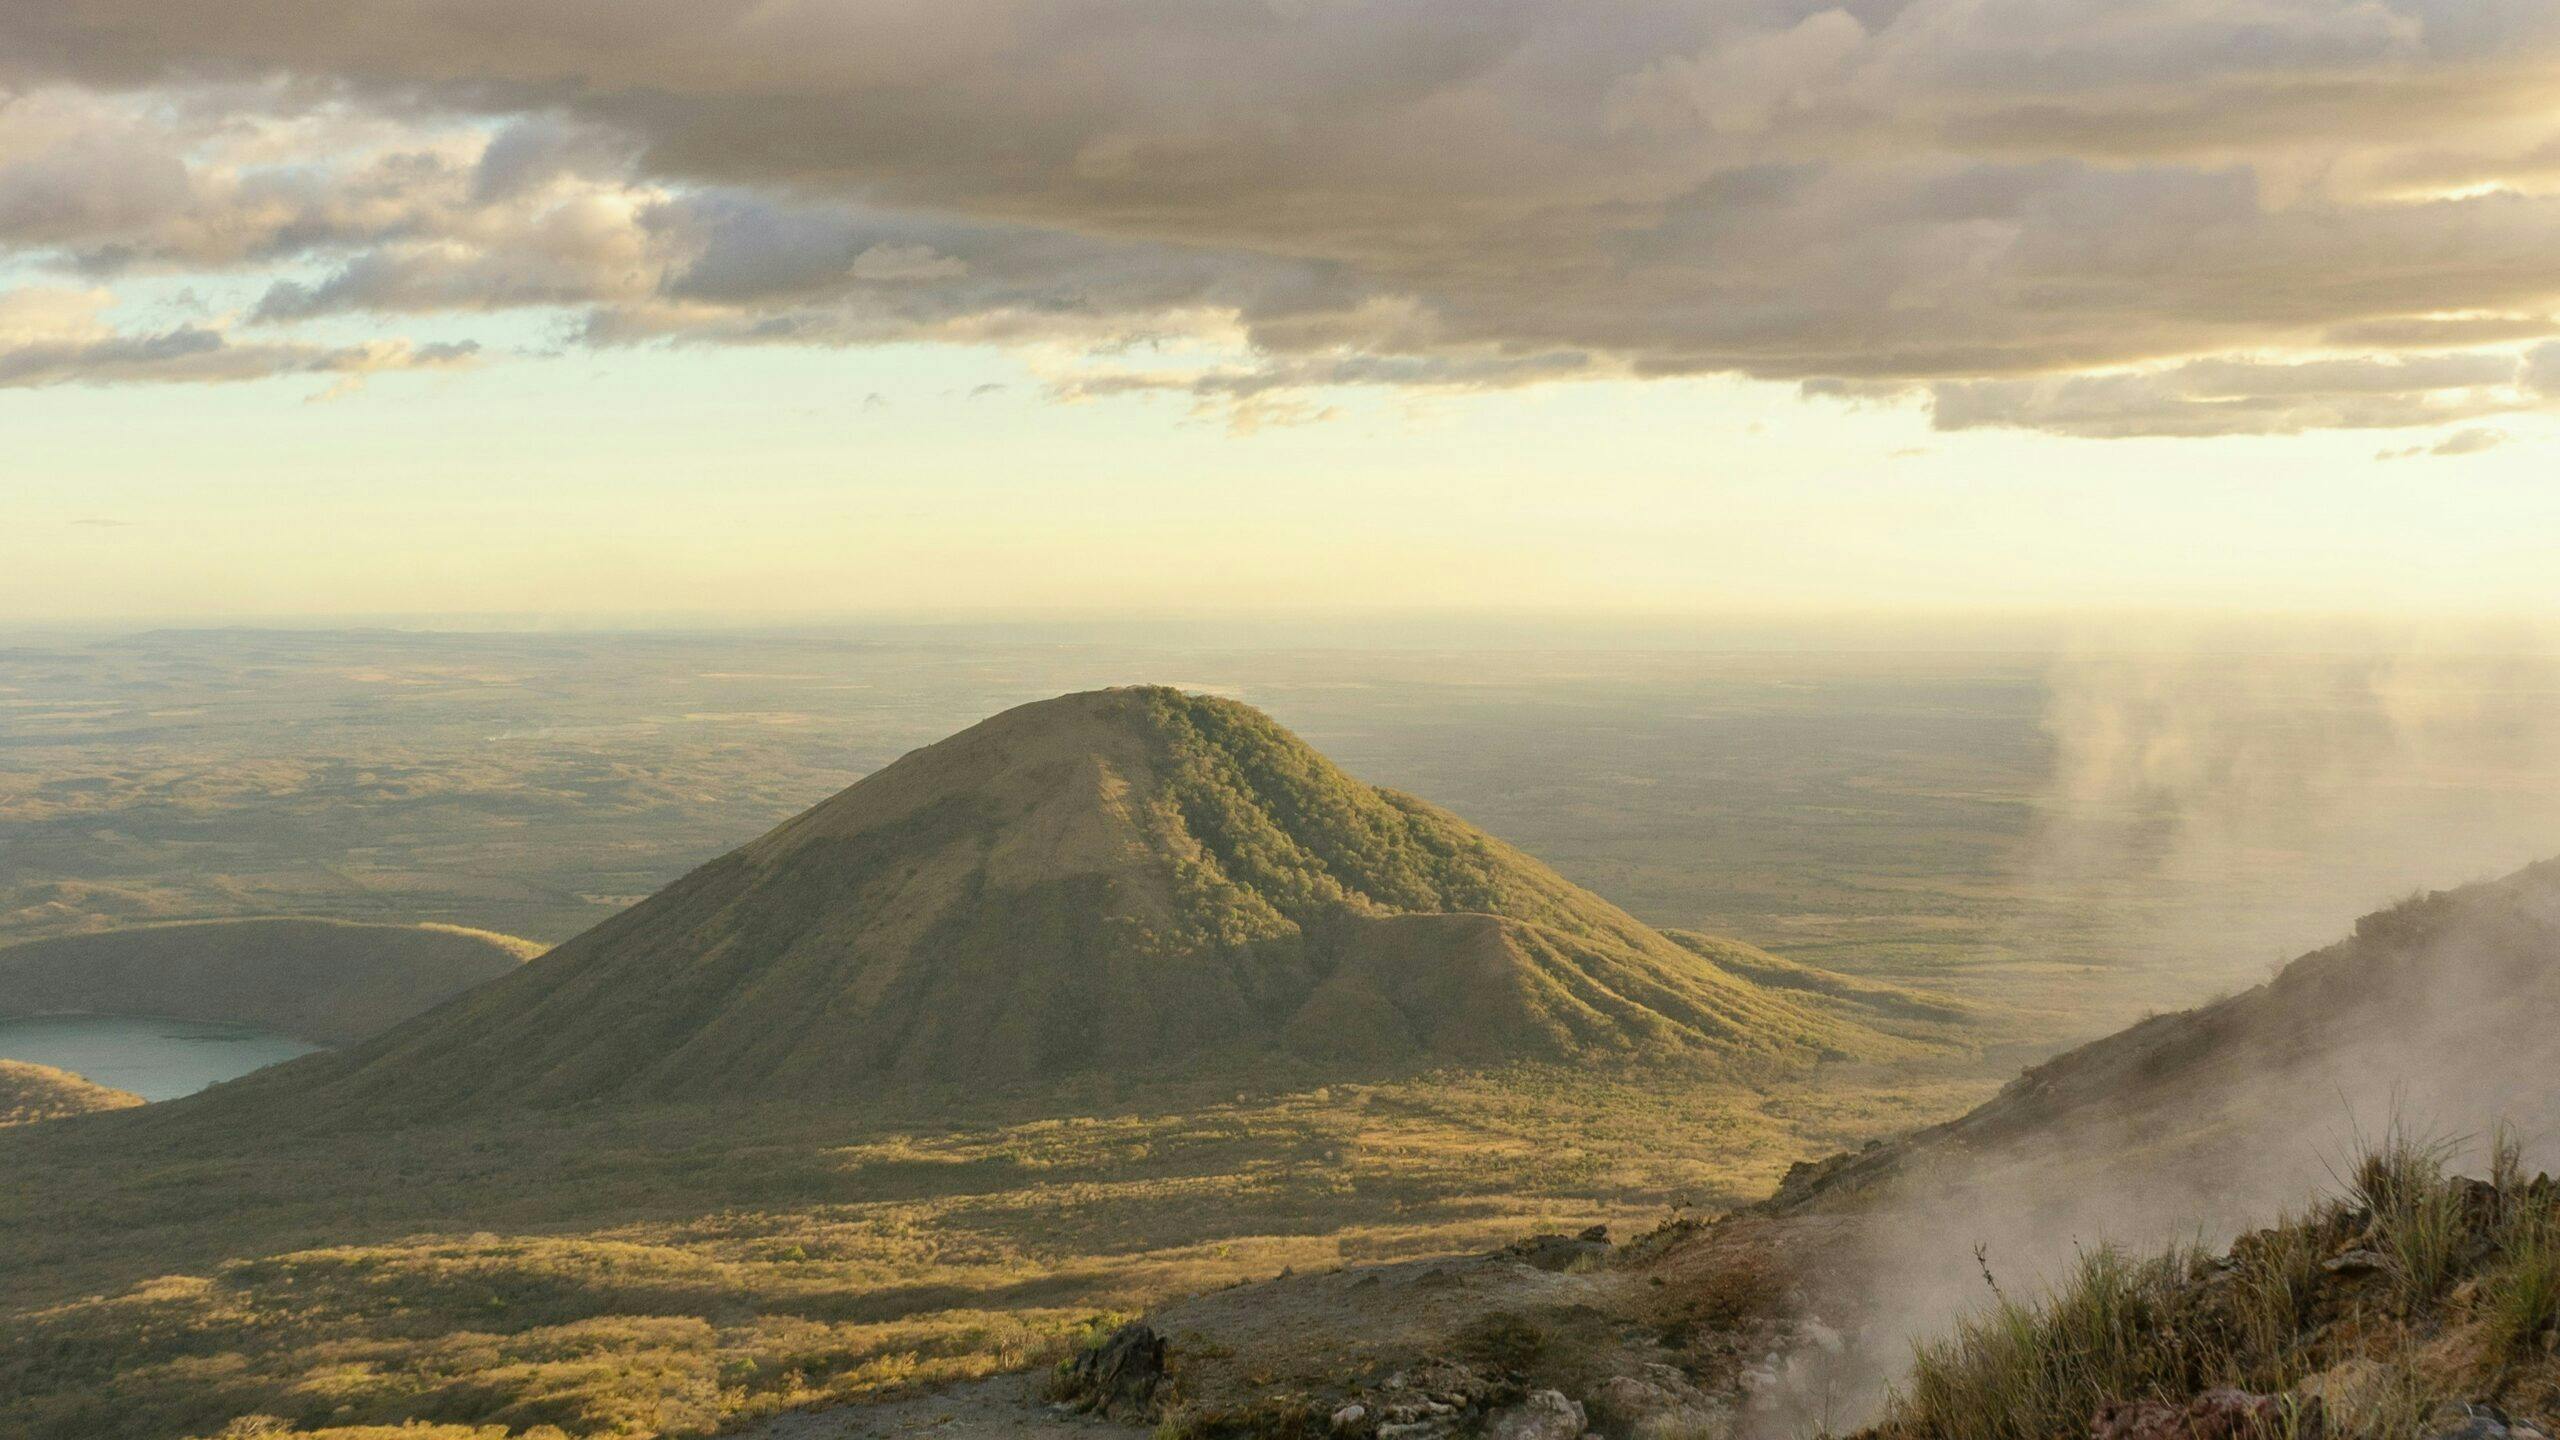 We're reimagining a fairer way to visit Nicaragua